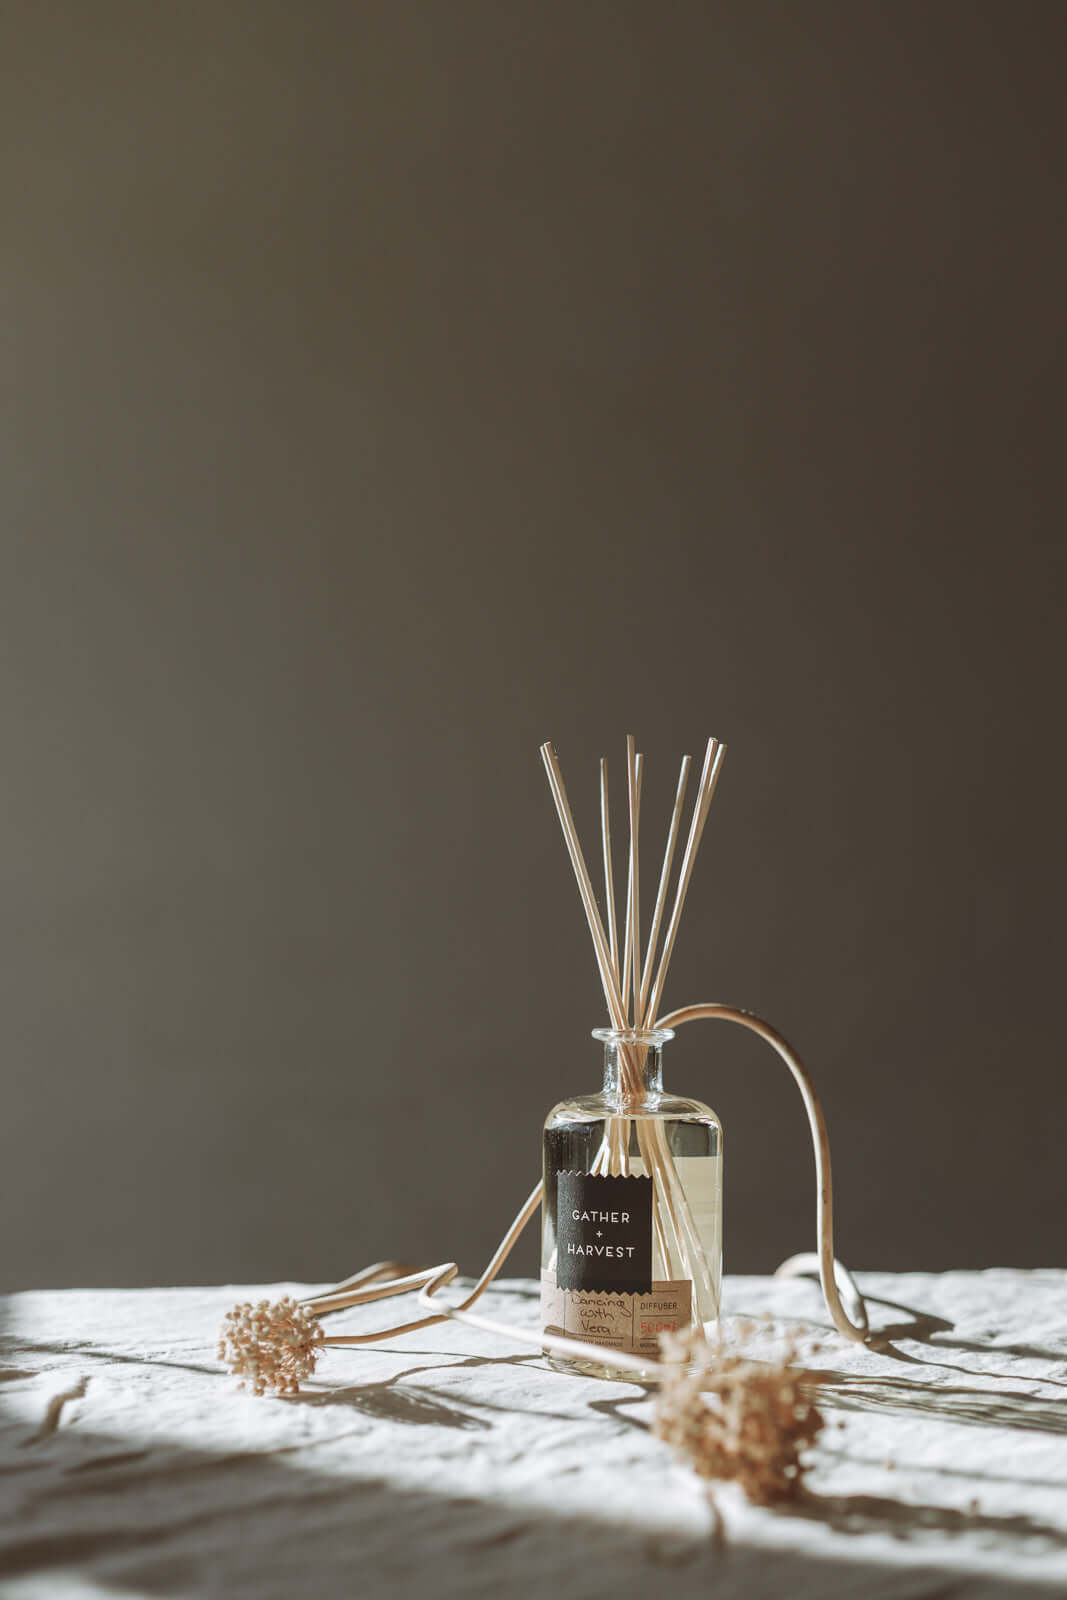 Our natural reed diffuser Dancing with Vera is perfect for 12+ months of subtle scents for your home